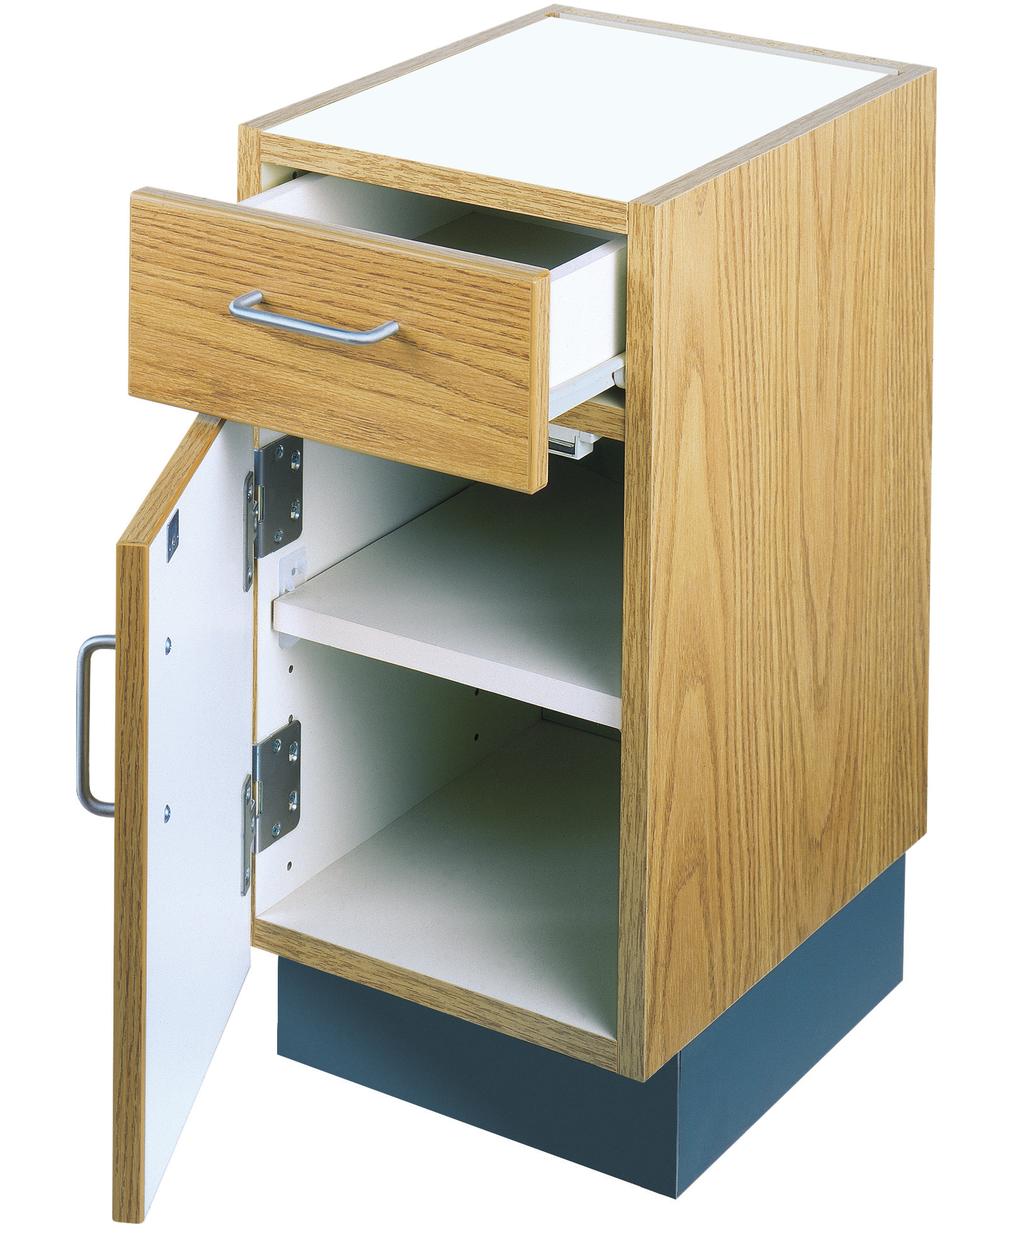 WOOD CABINET LINES Q-Line Series Q-Line Series is a high quality, full overlay cabinet system designed for the most demanding environments. The look is clean and modern.